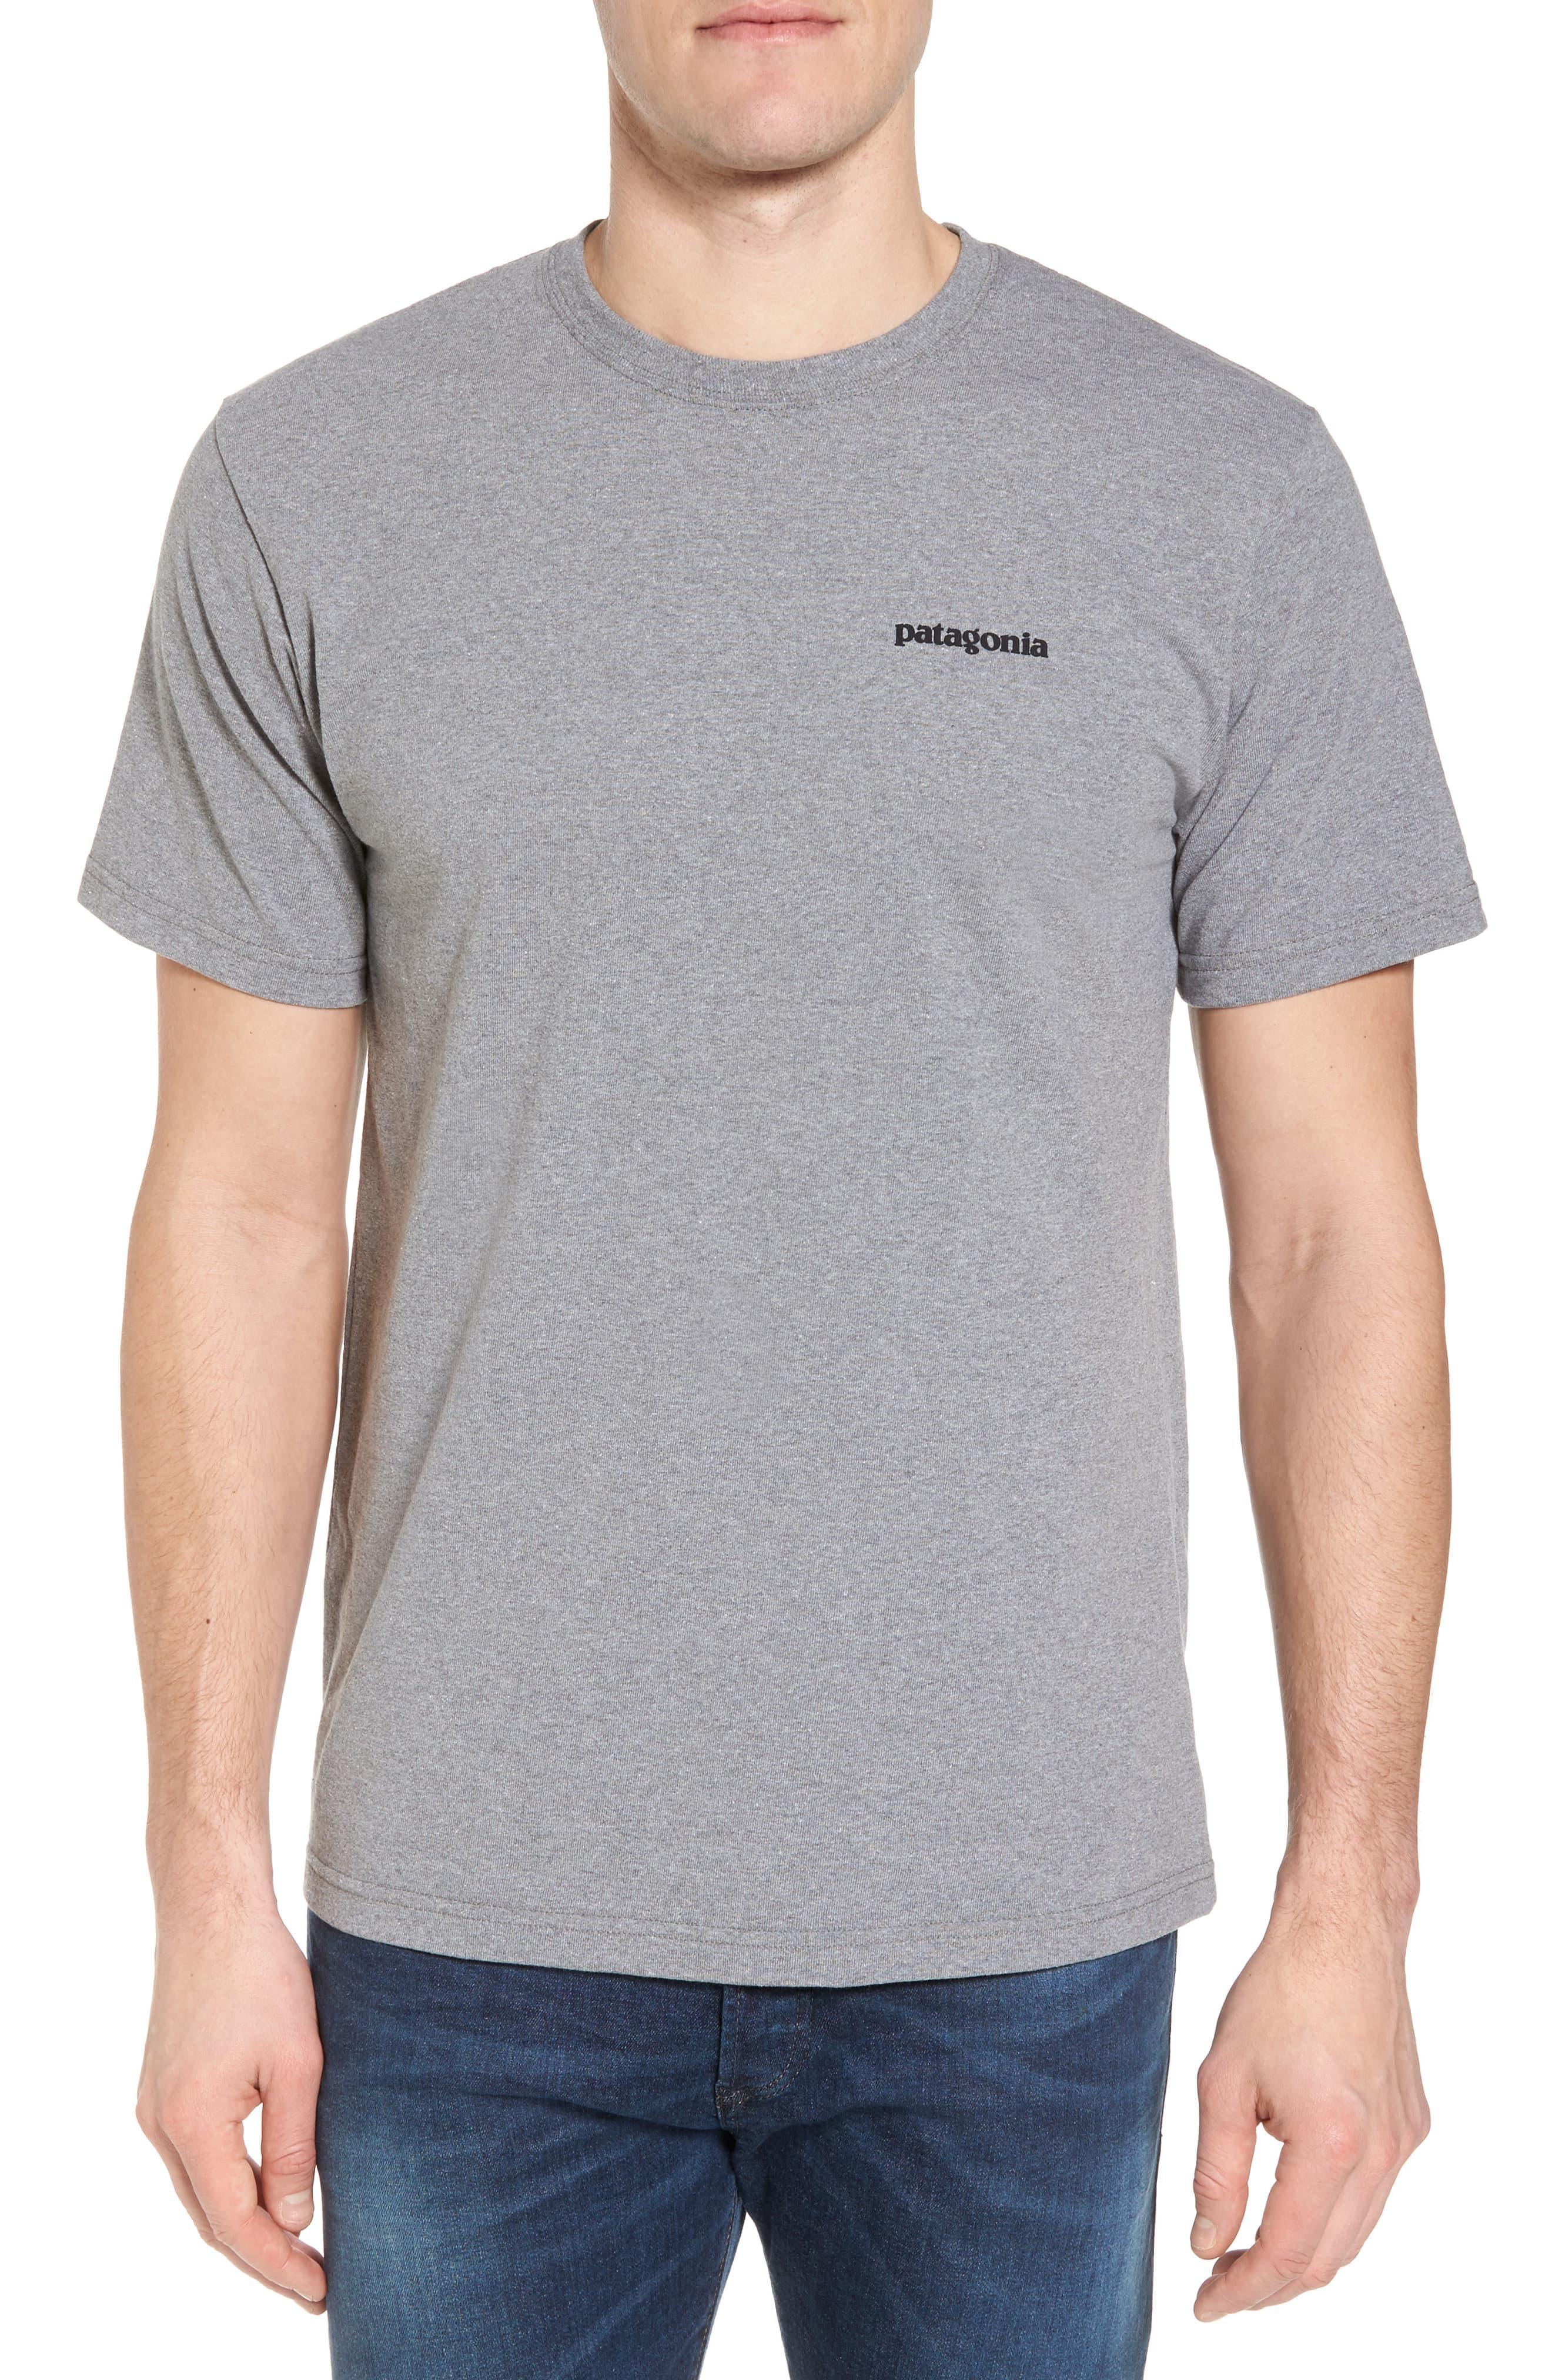 Patagonia Cotton Responsibili-tee T-shirt in Gray for Men - Lyst